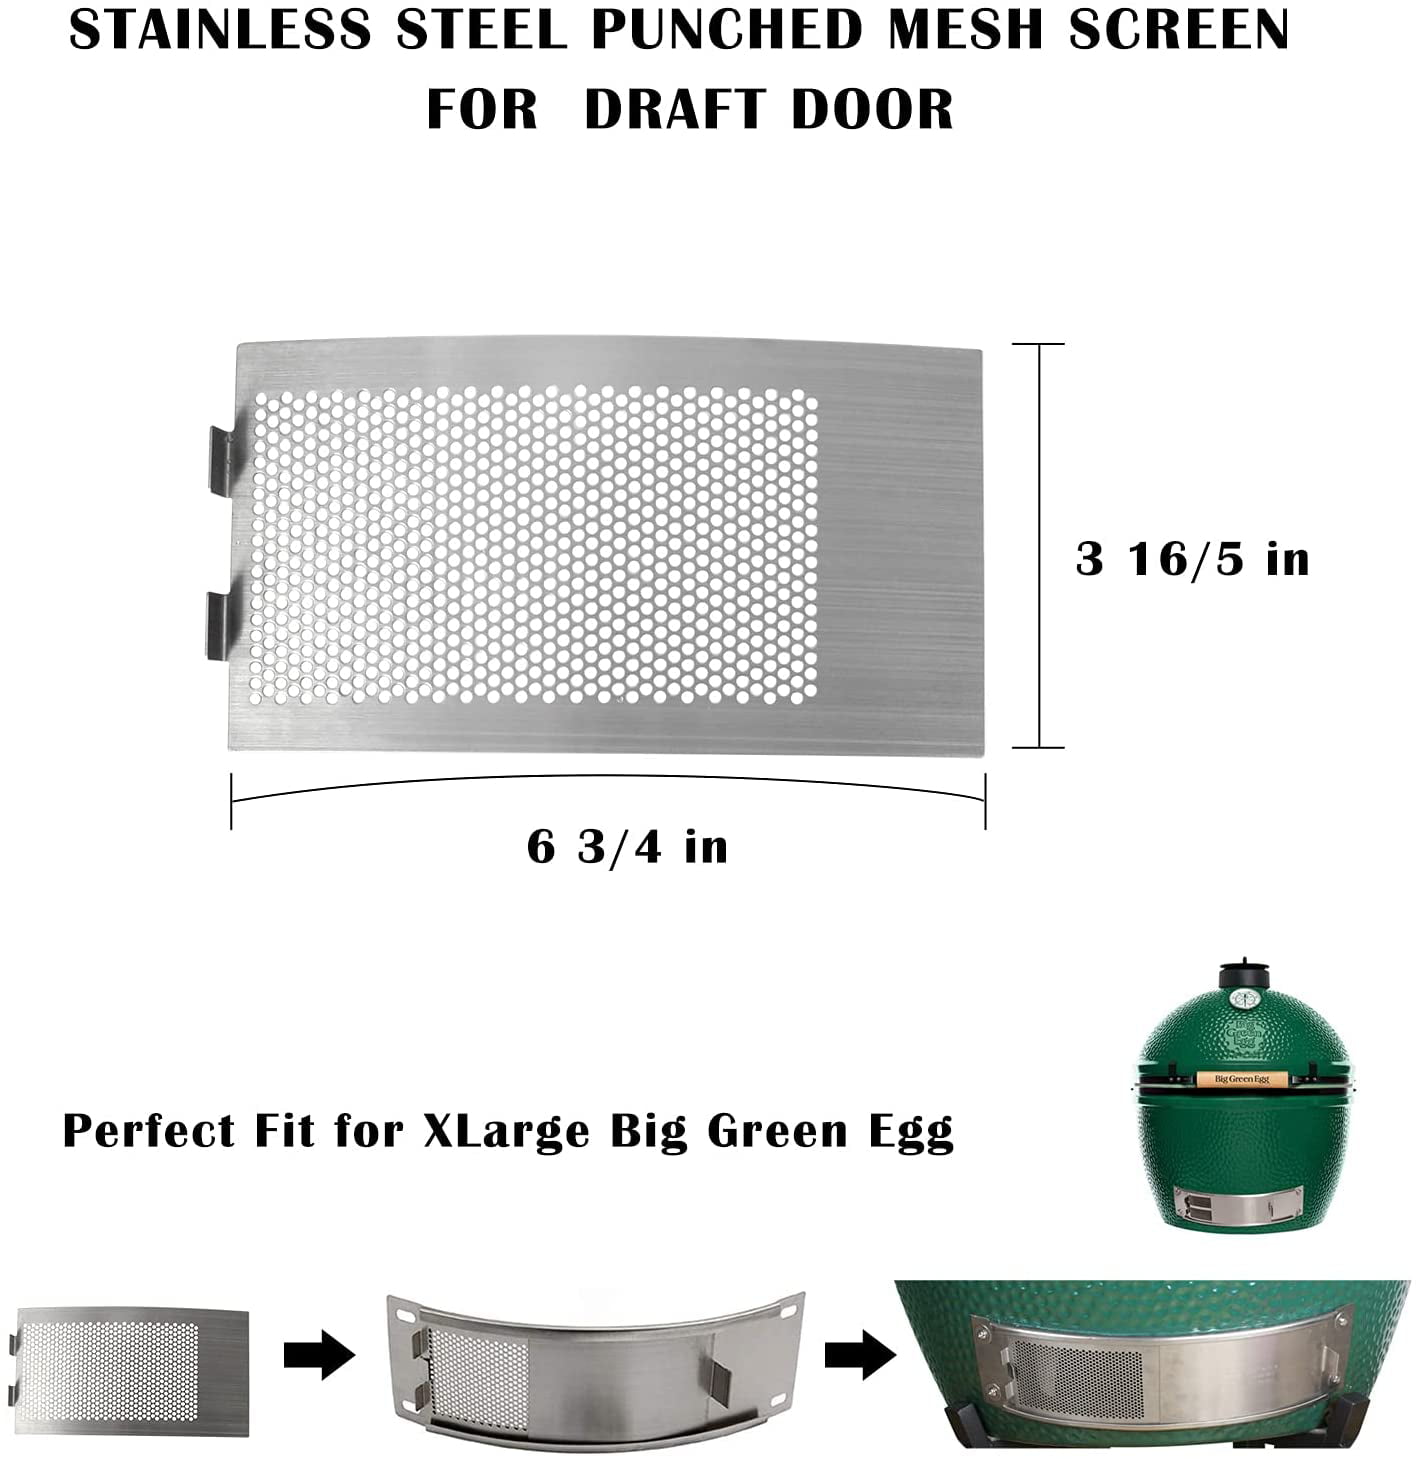 Details about   Metal Punched Bge Mesh Screen Panel Big Green Egg Accessories Draft Door Screen 